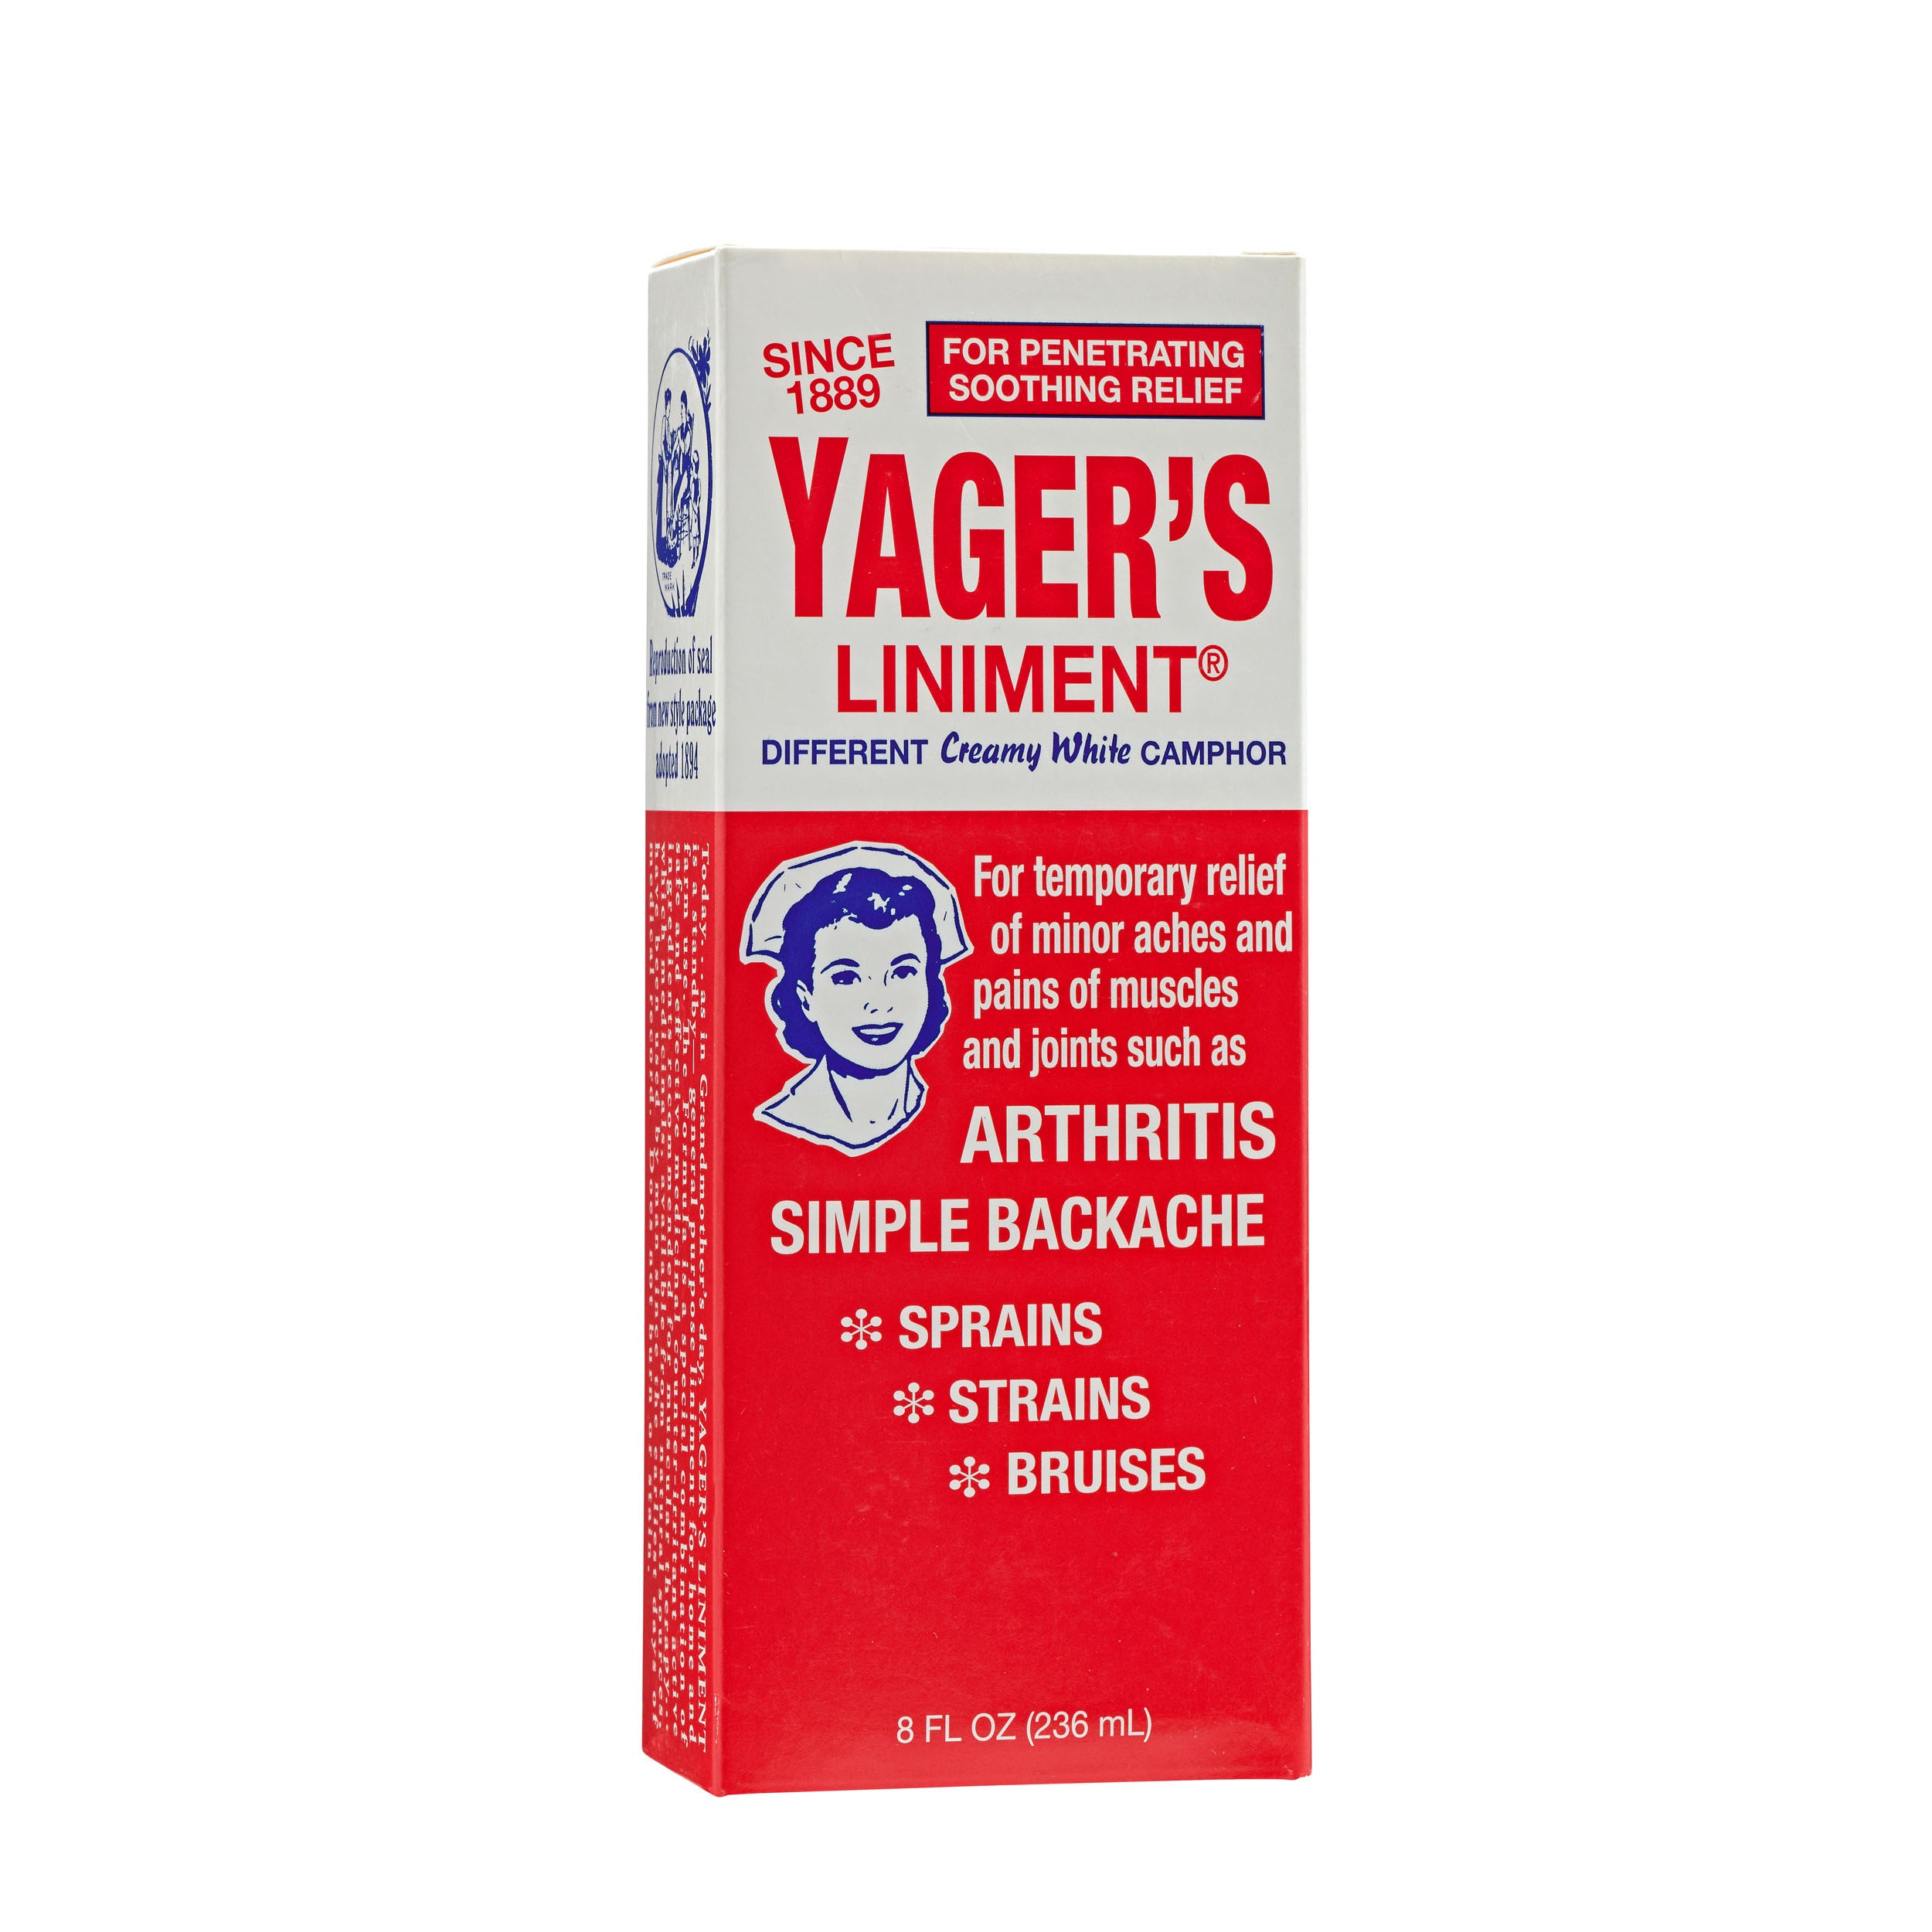 Yager’s Liniment